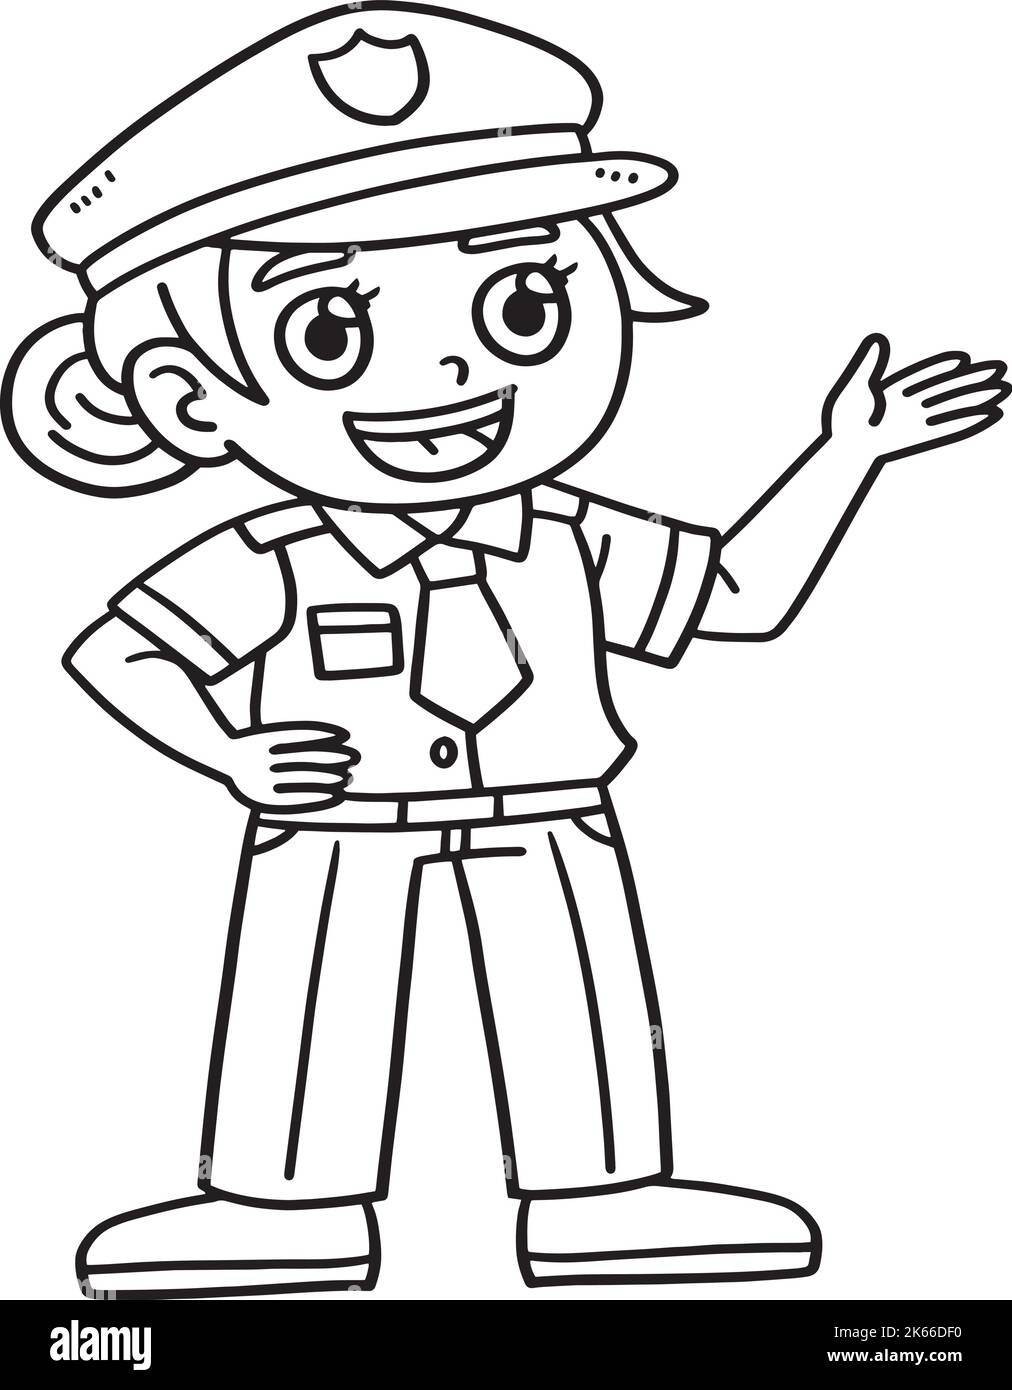 Police Officer Isolated Coloring Page for Kids Stock Vector